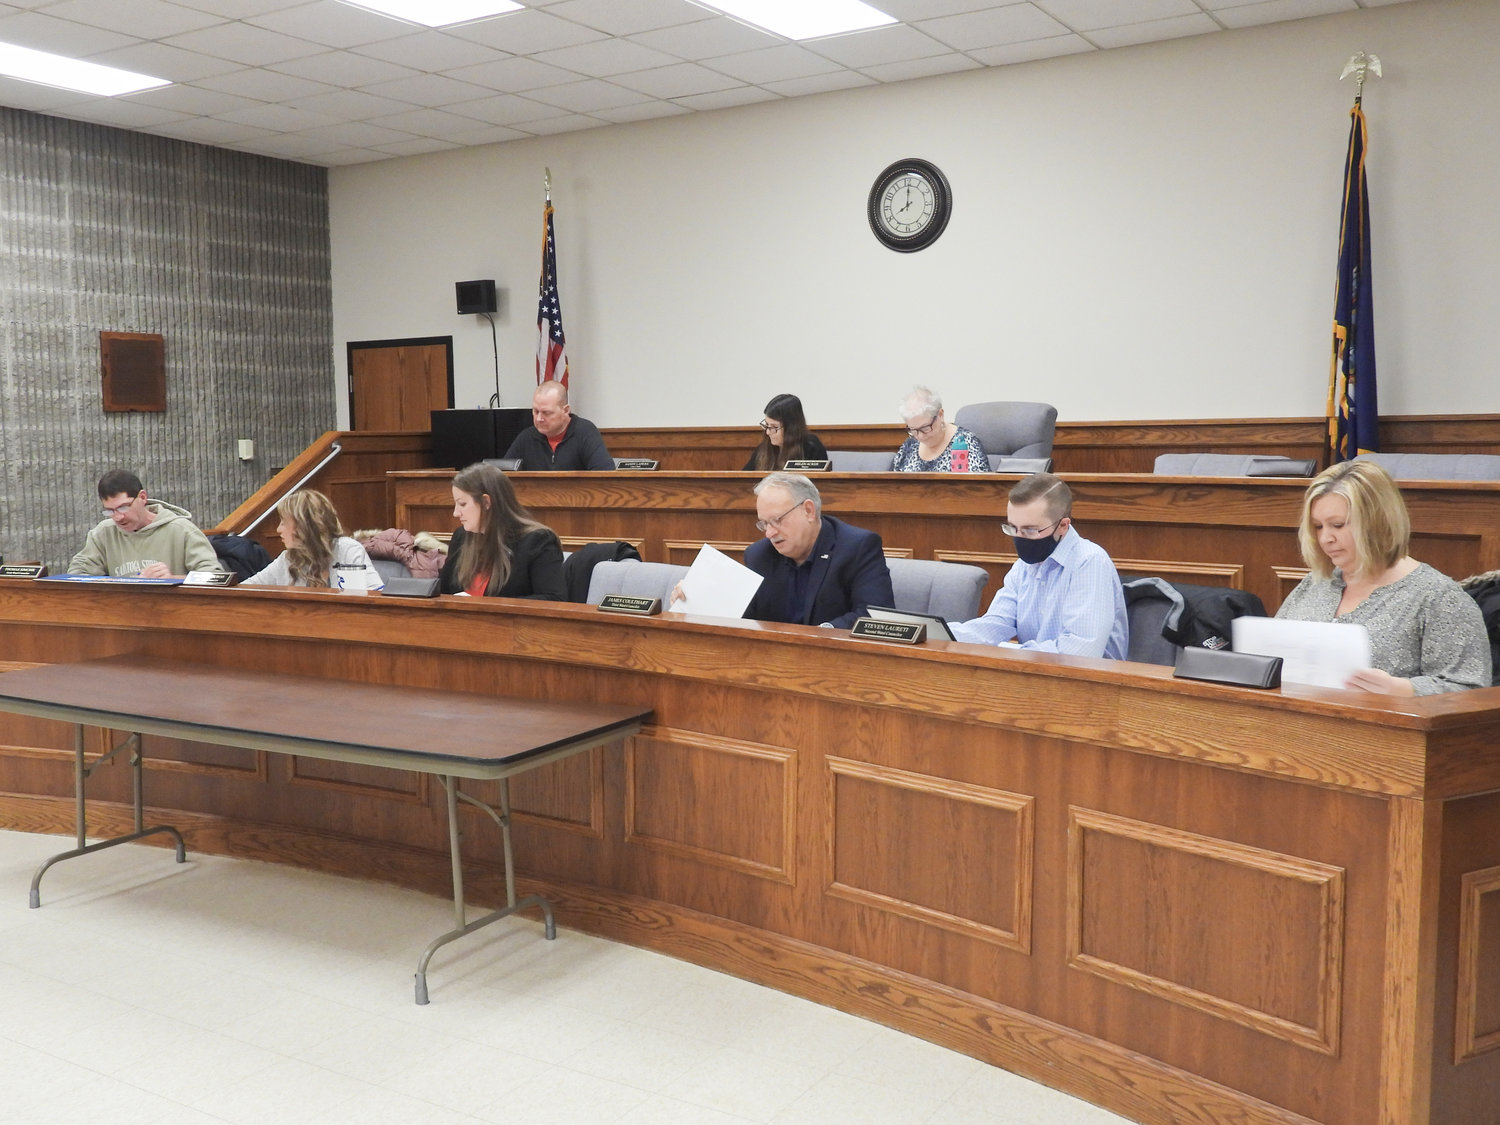 FINAL MEETING — The Oneida city council holds its last meeting of 2021, taking care of any unfinished business and looking to the the new year.